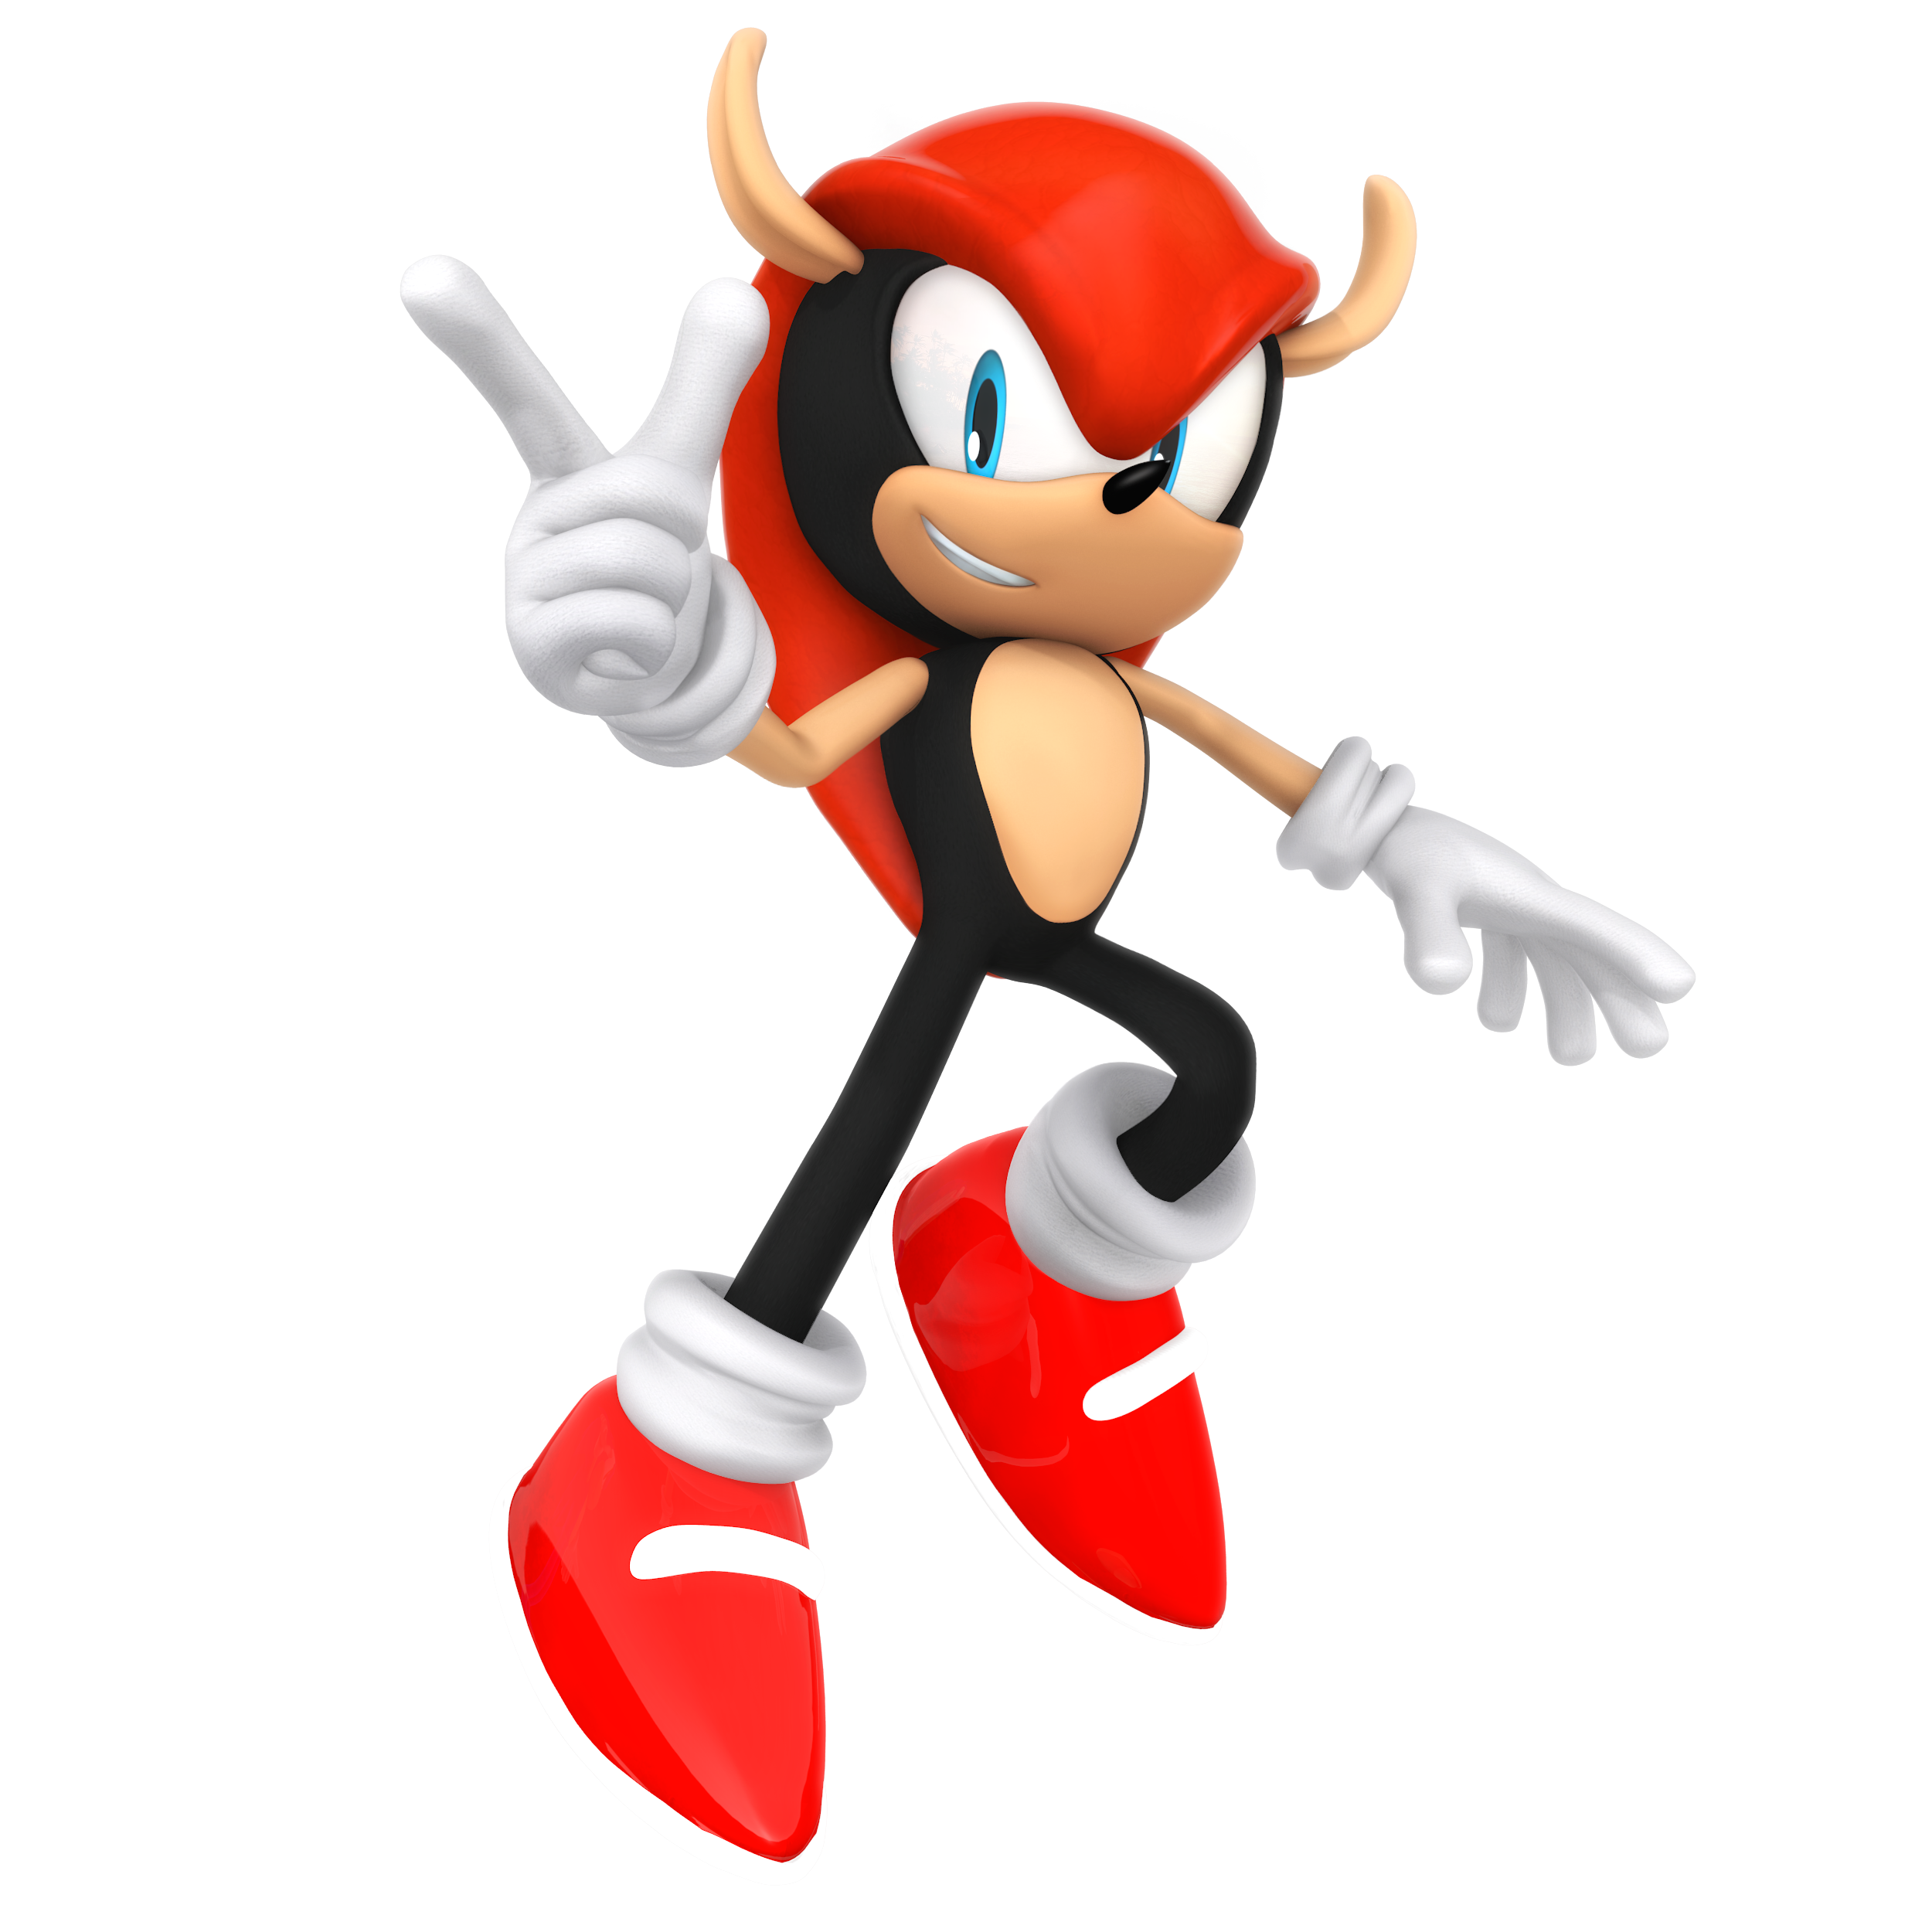 Nibroc.Rock on X: Unveiling today on Knuckles Chaotix's anniversary Brand  new models for Mighty The Armadillo (both Modern & Classic)   / X